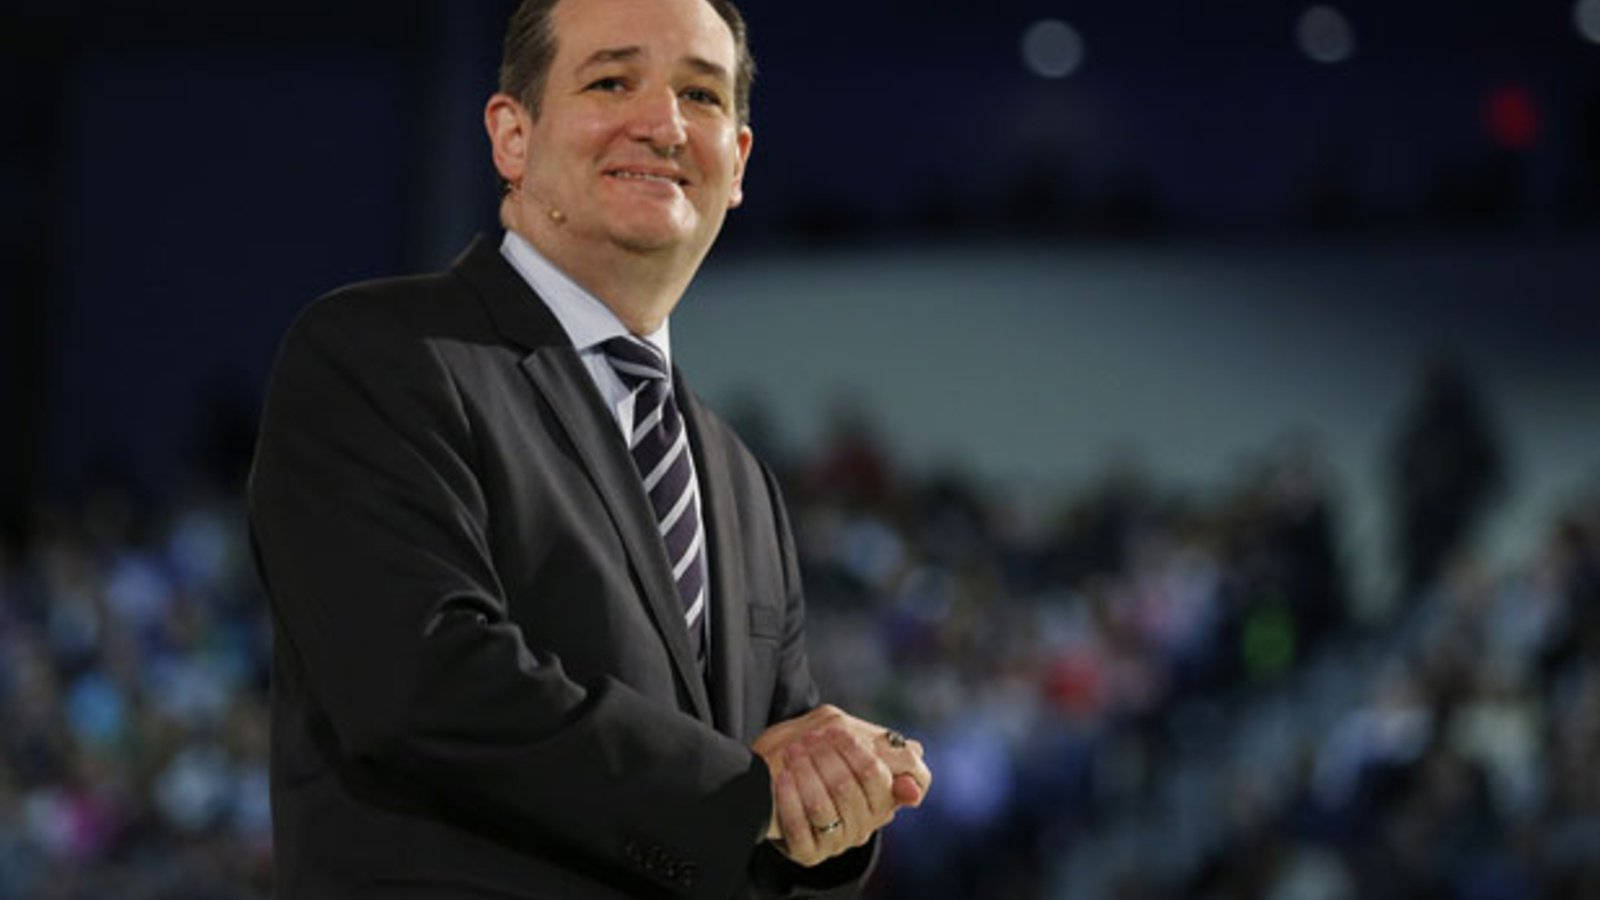 Ted Cruz Smiling At The Crowd Wallpaper